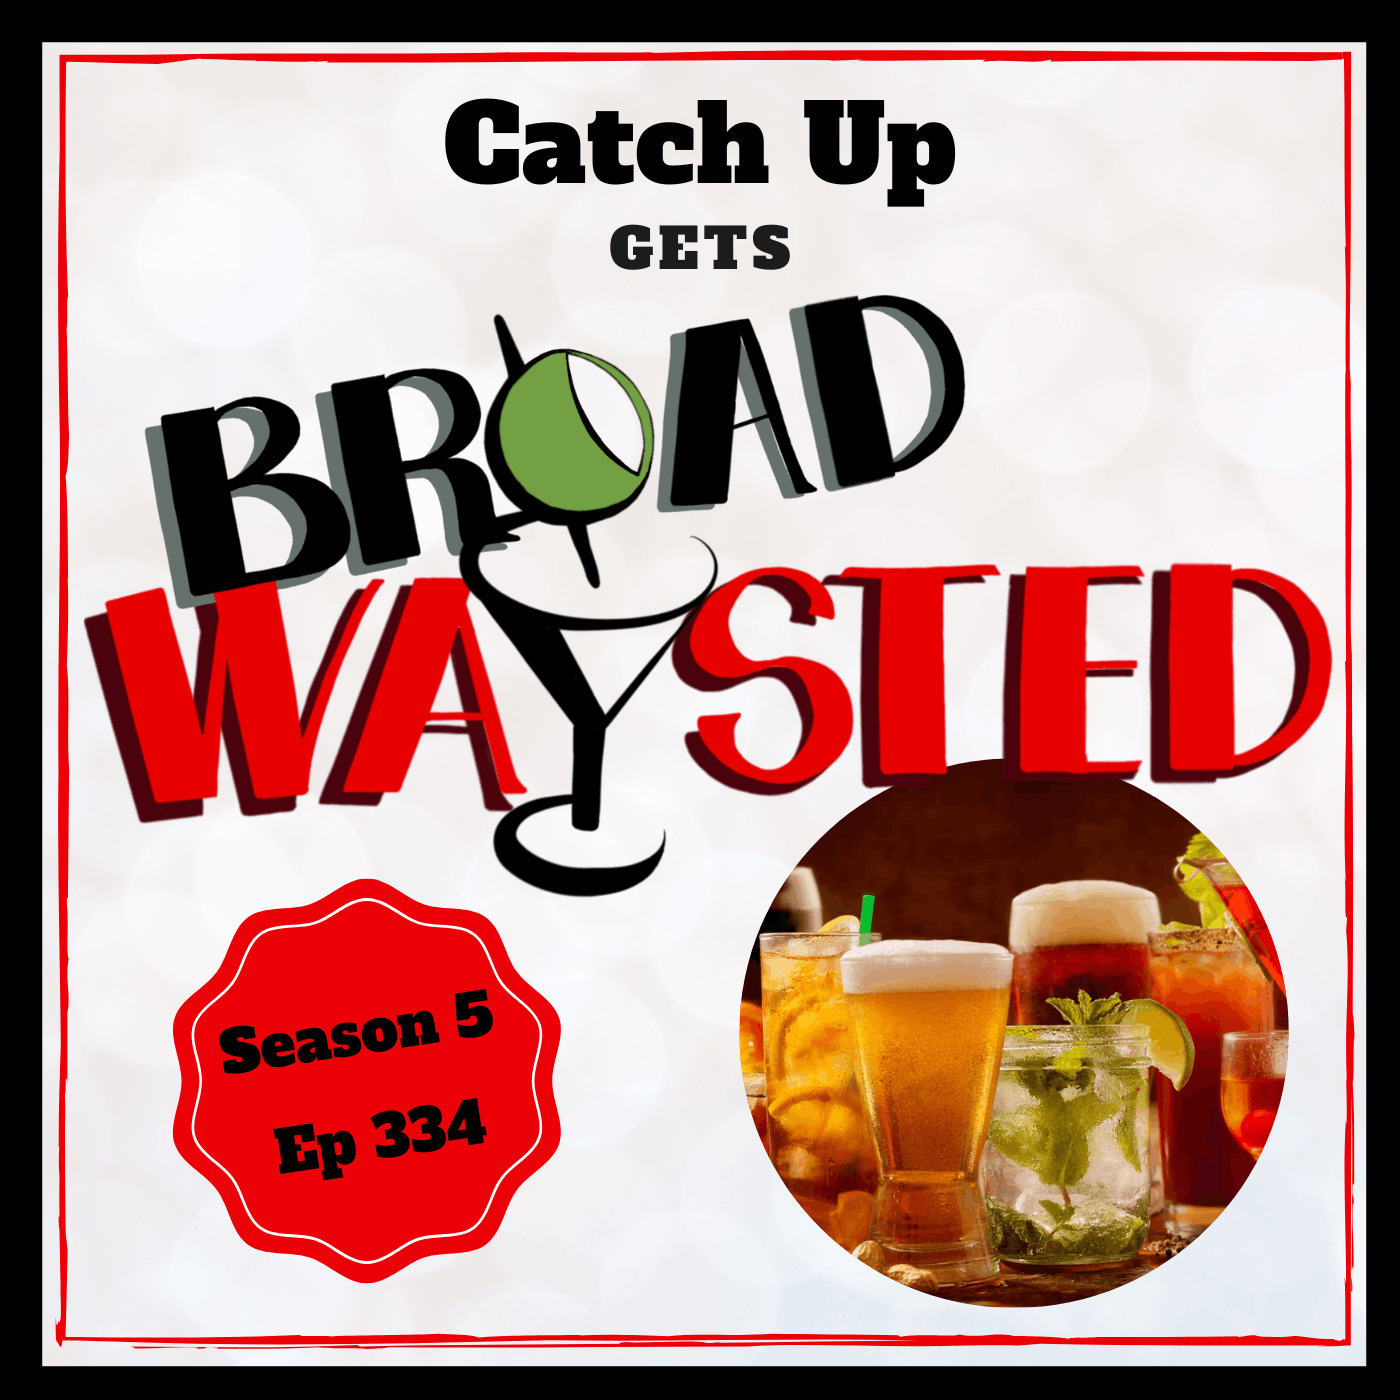 Episode 334: Catch Up gets Broadwaysted!